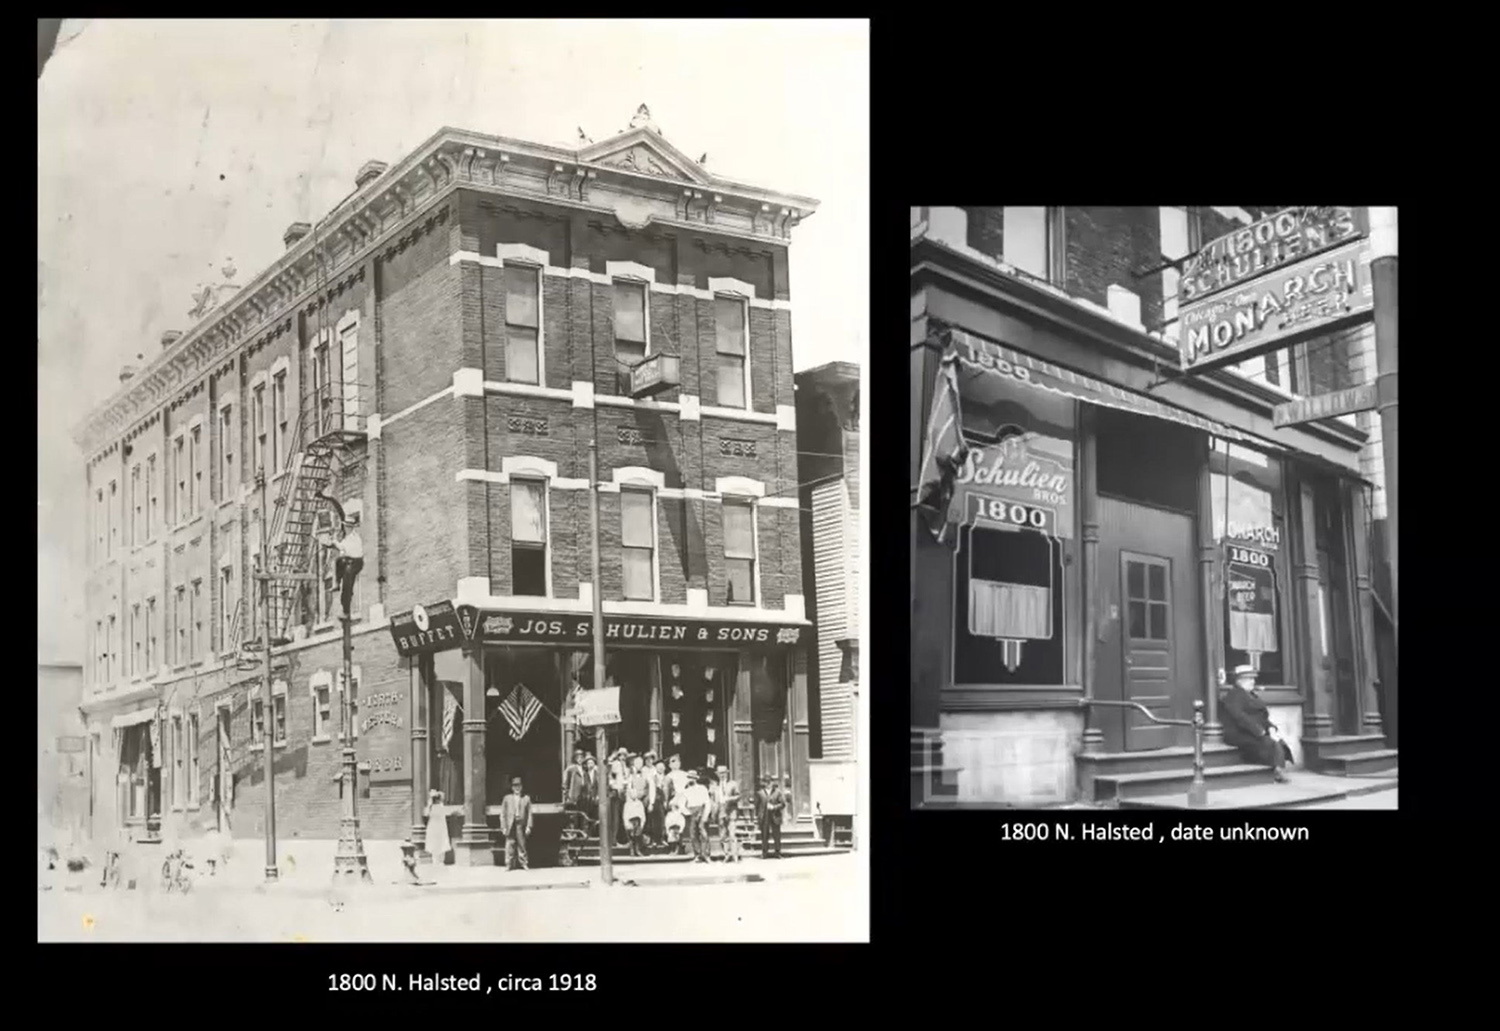 Historical Views of 1800 N Halsted Street. Images by CCL